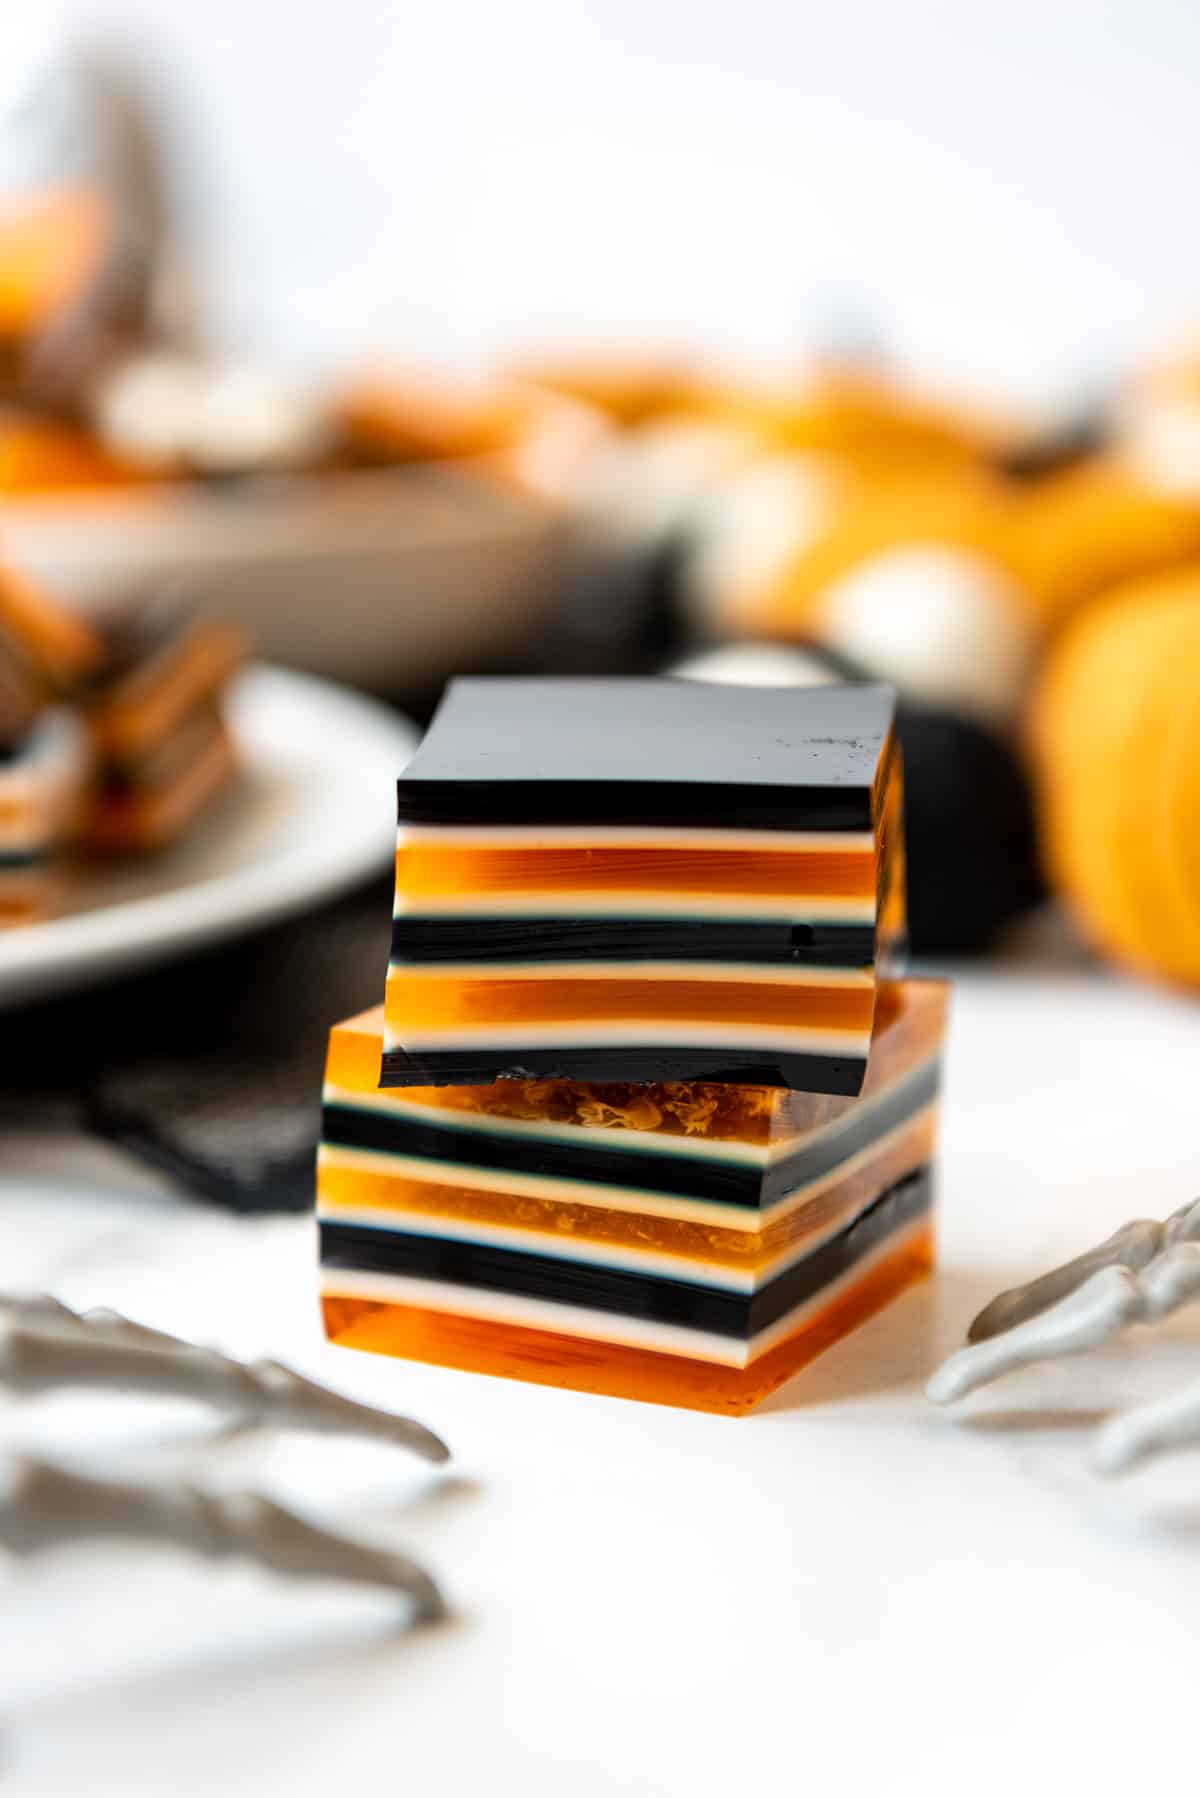 Striped squares of jello in orange, black, and white for a Halloween finger food.